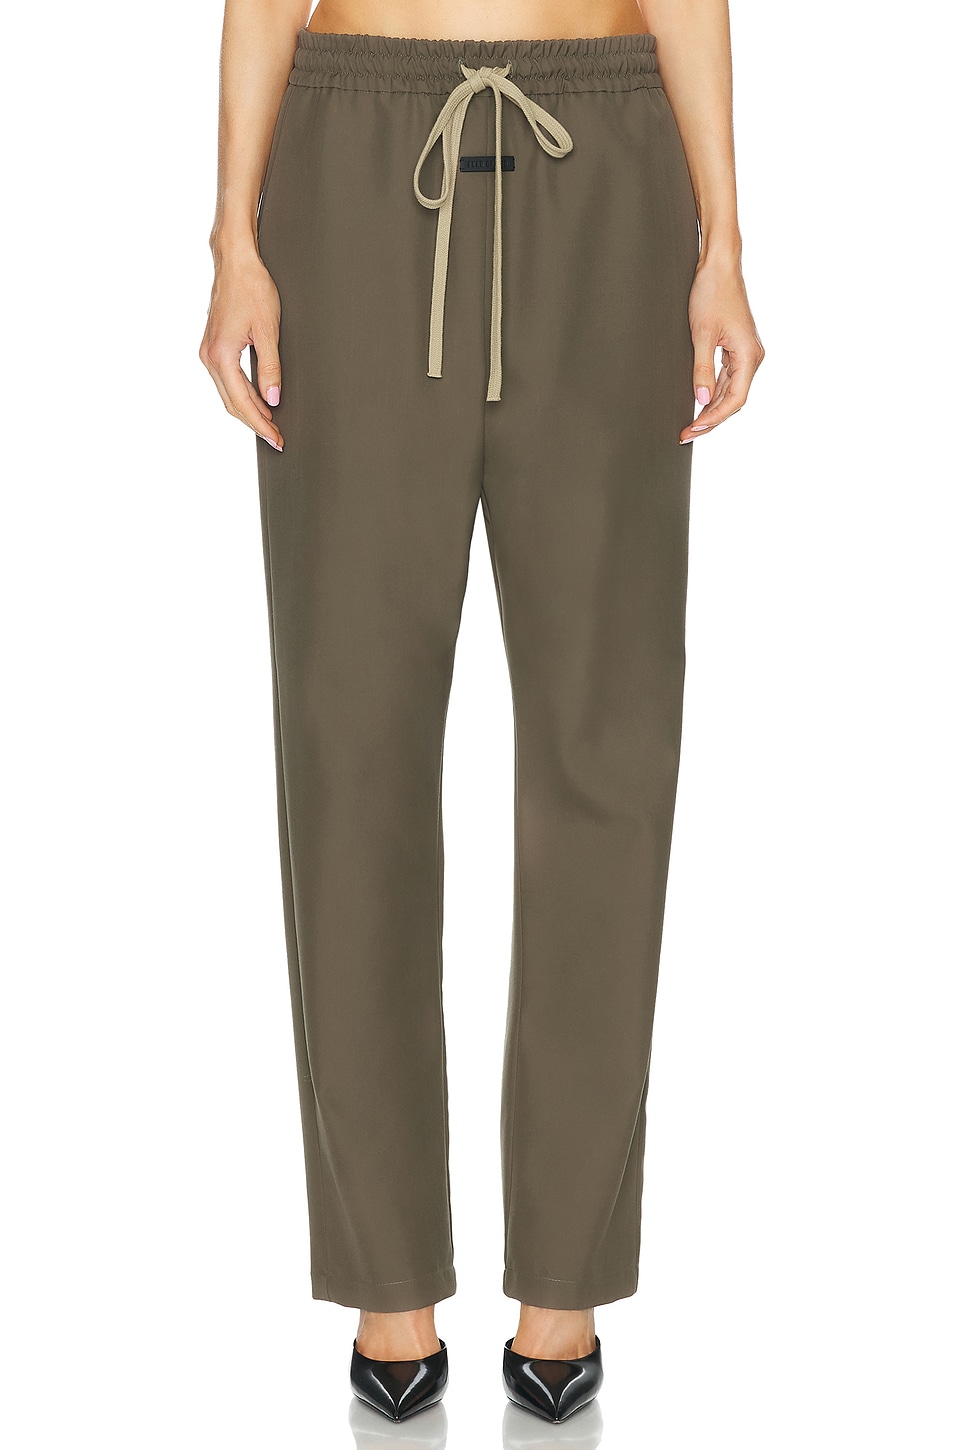 Image 1 of Fear of God Wool Crepe Forum Pant in Wood